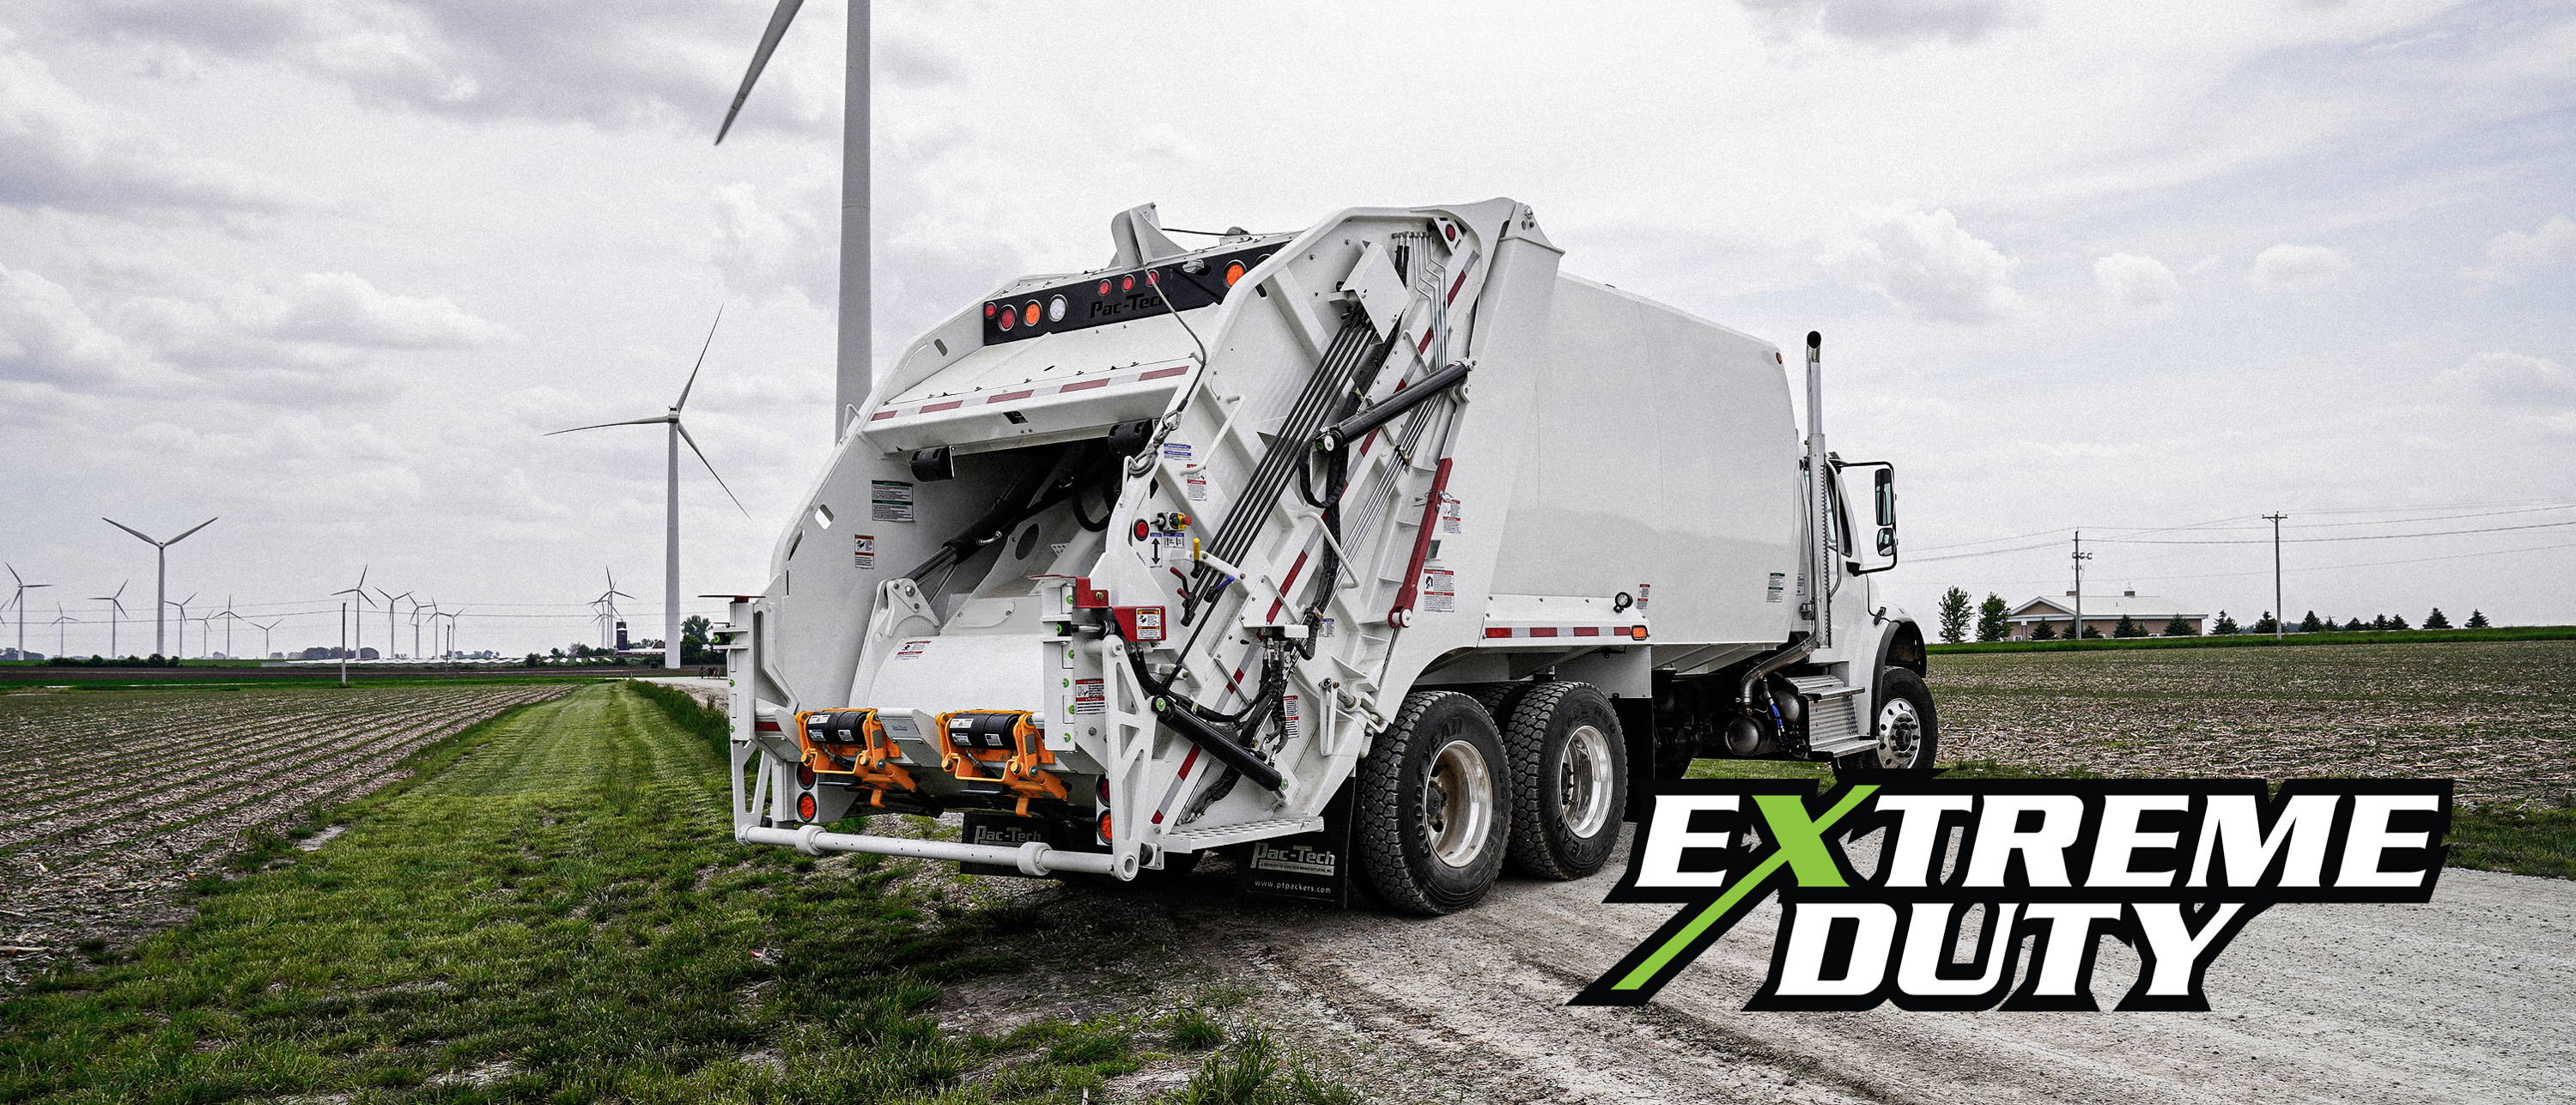 Extreme Duty Rear Loader Garbage Truck